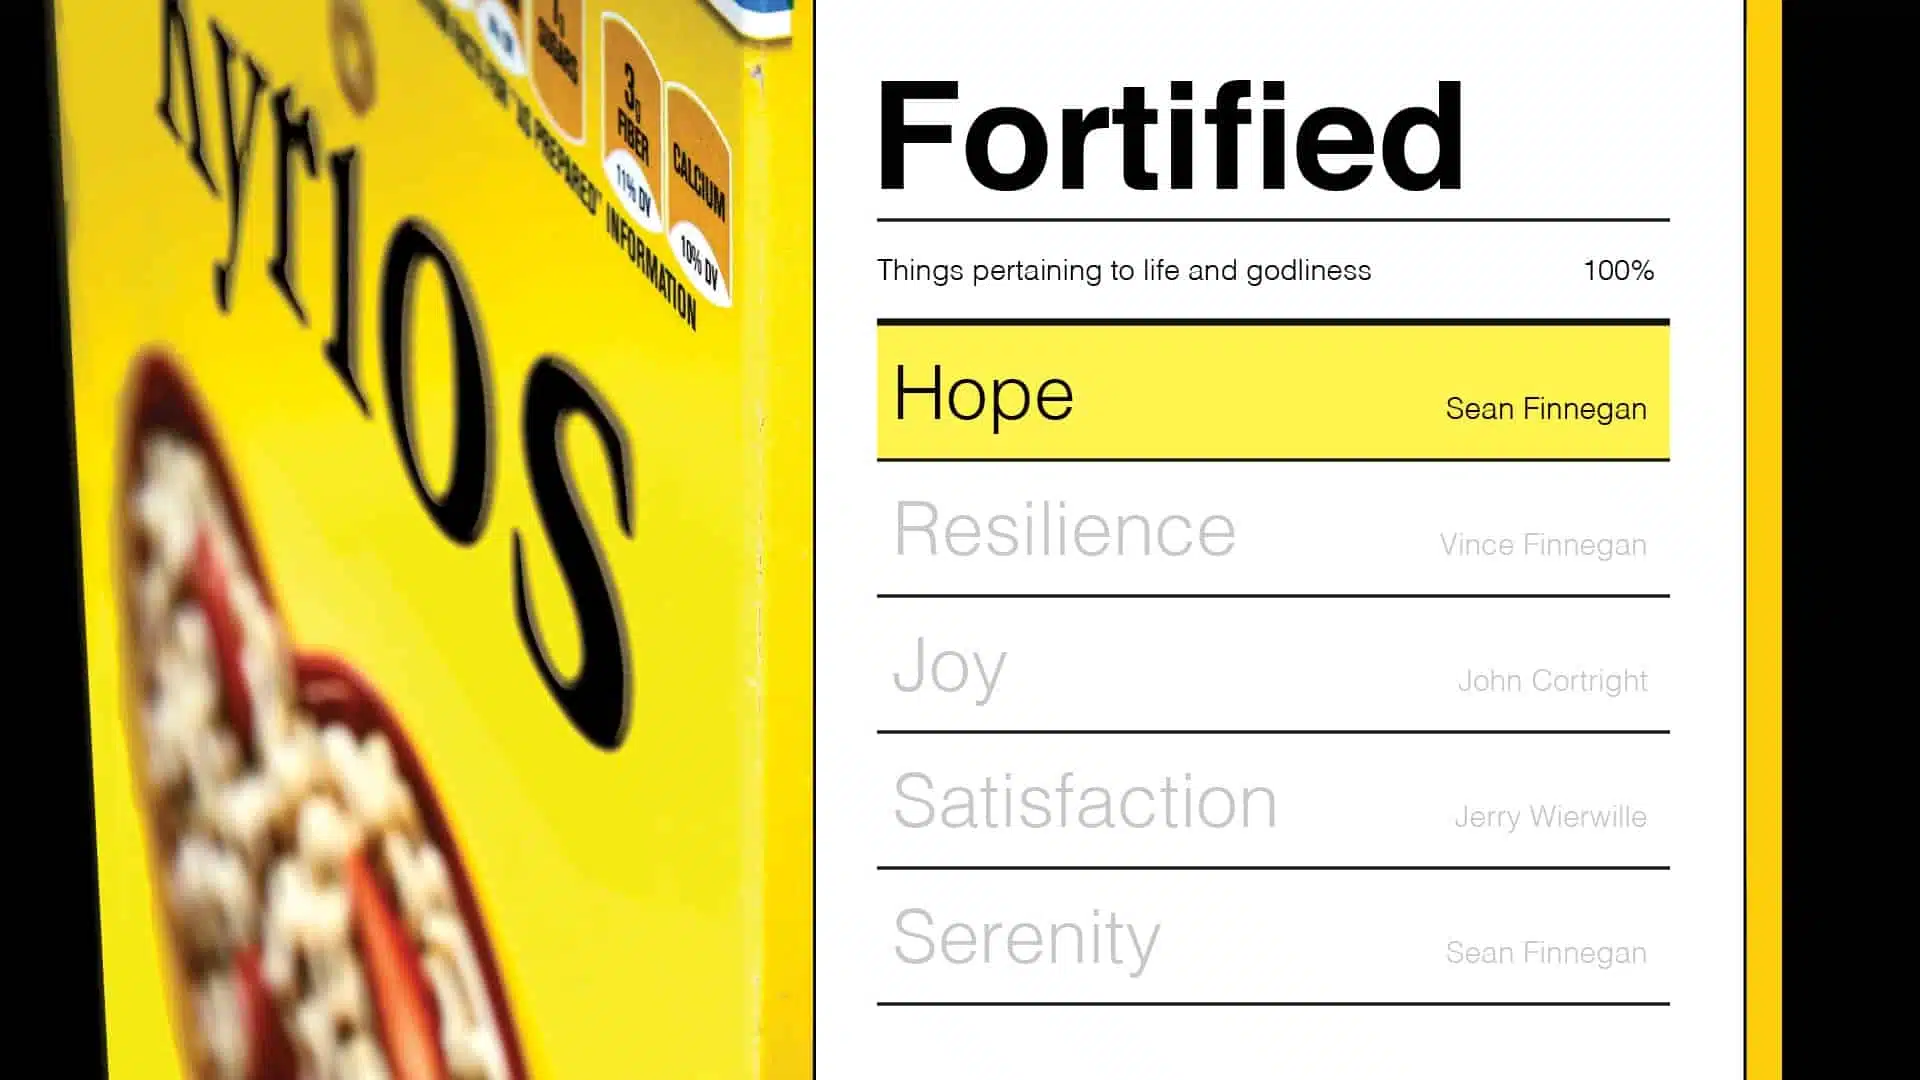 Fortified by Hope